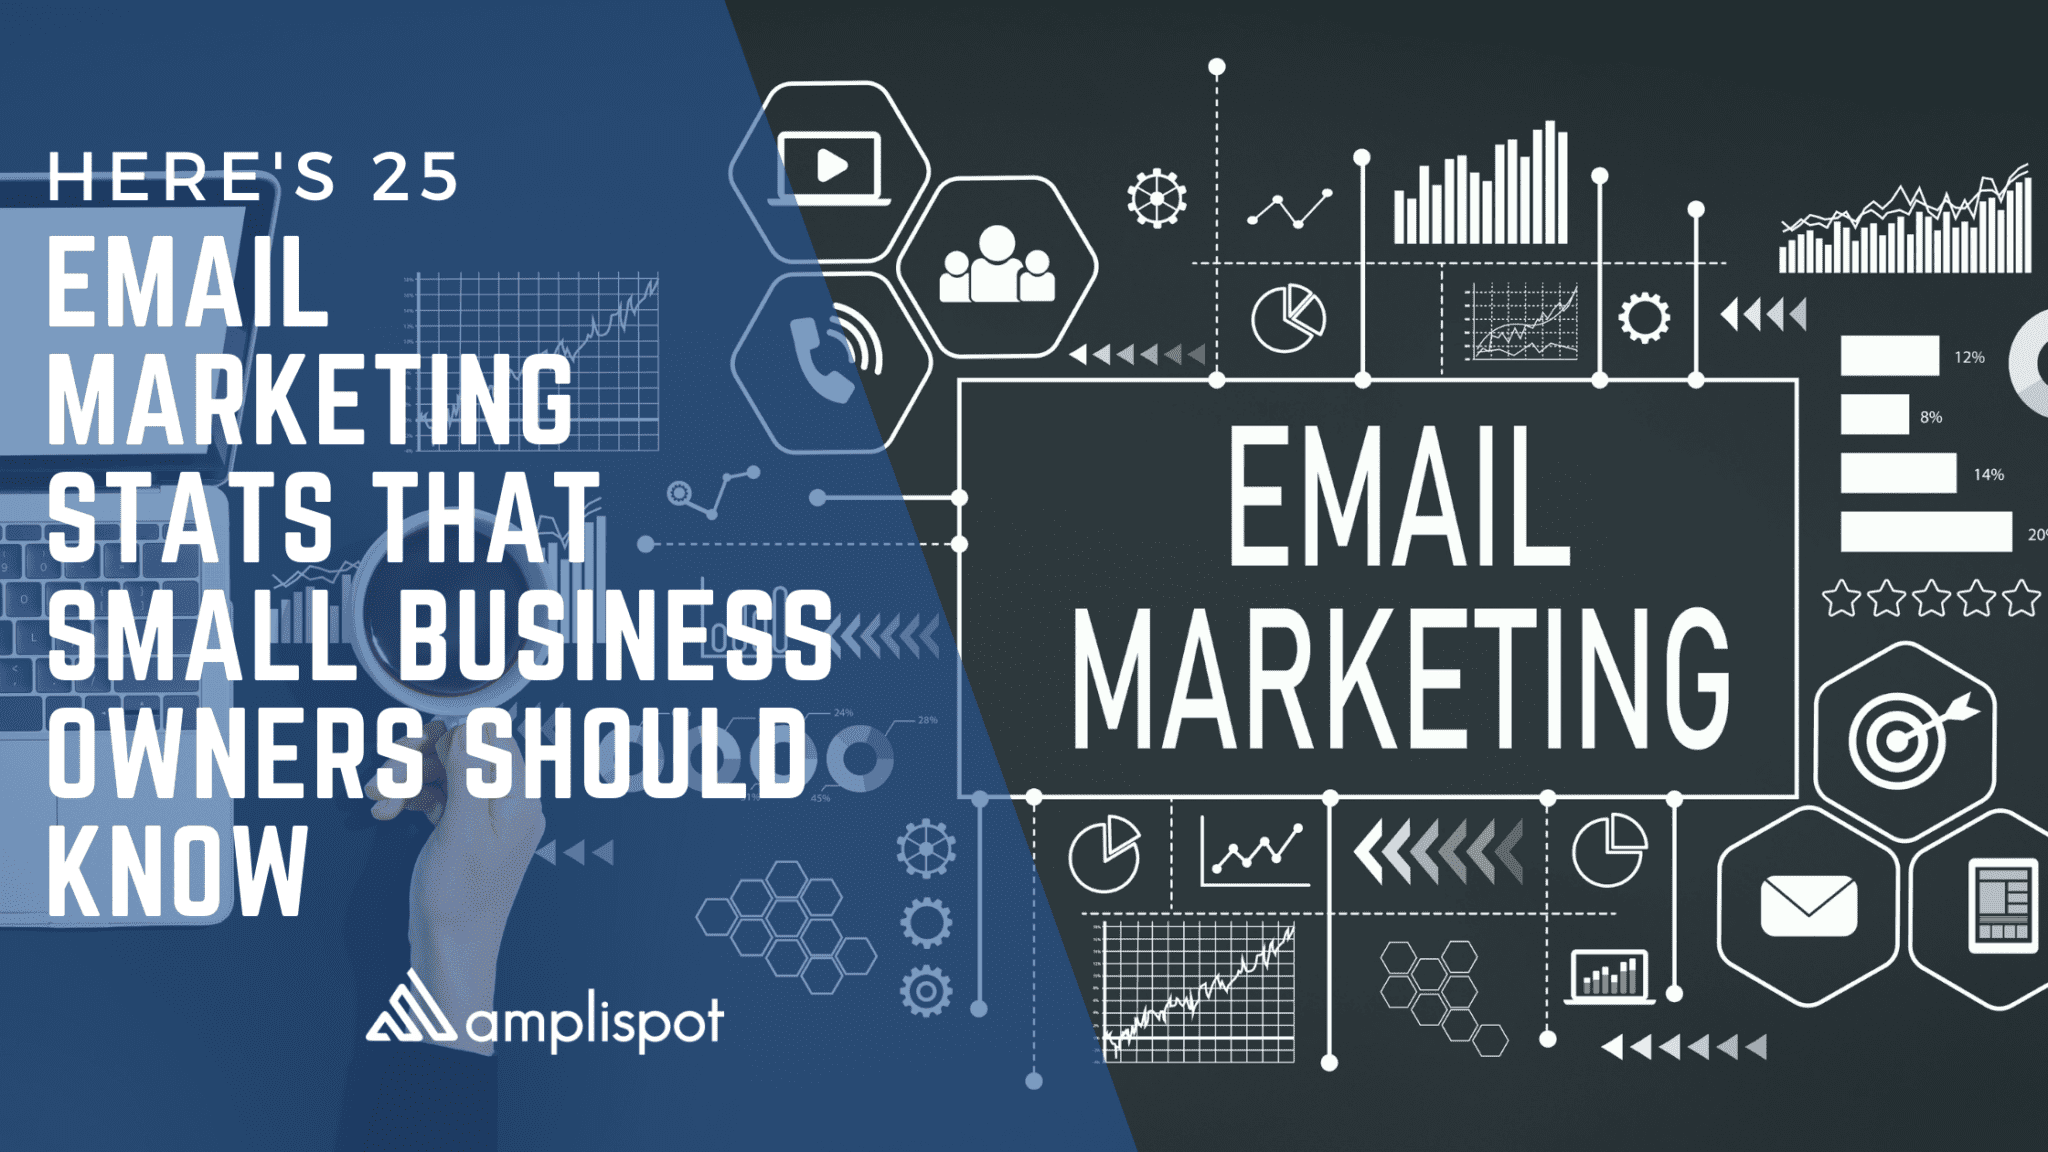 Here's 25 Email Marketing Stats That Small Business Owners Should Know